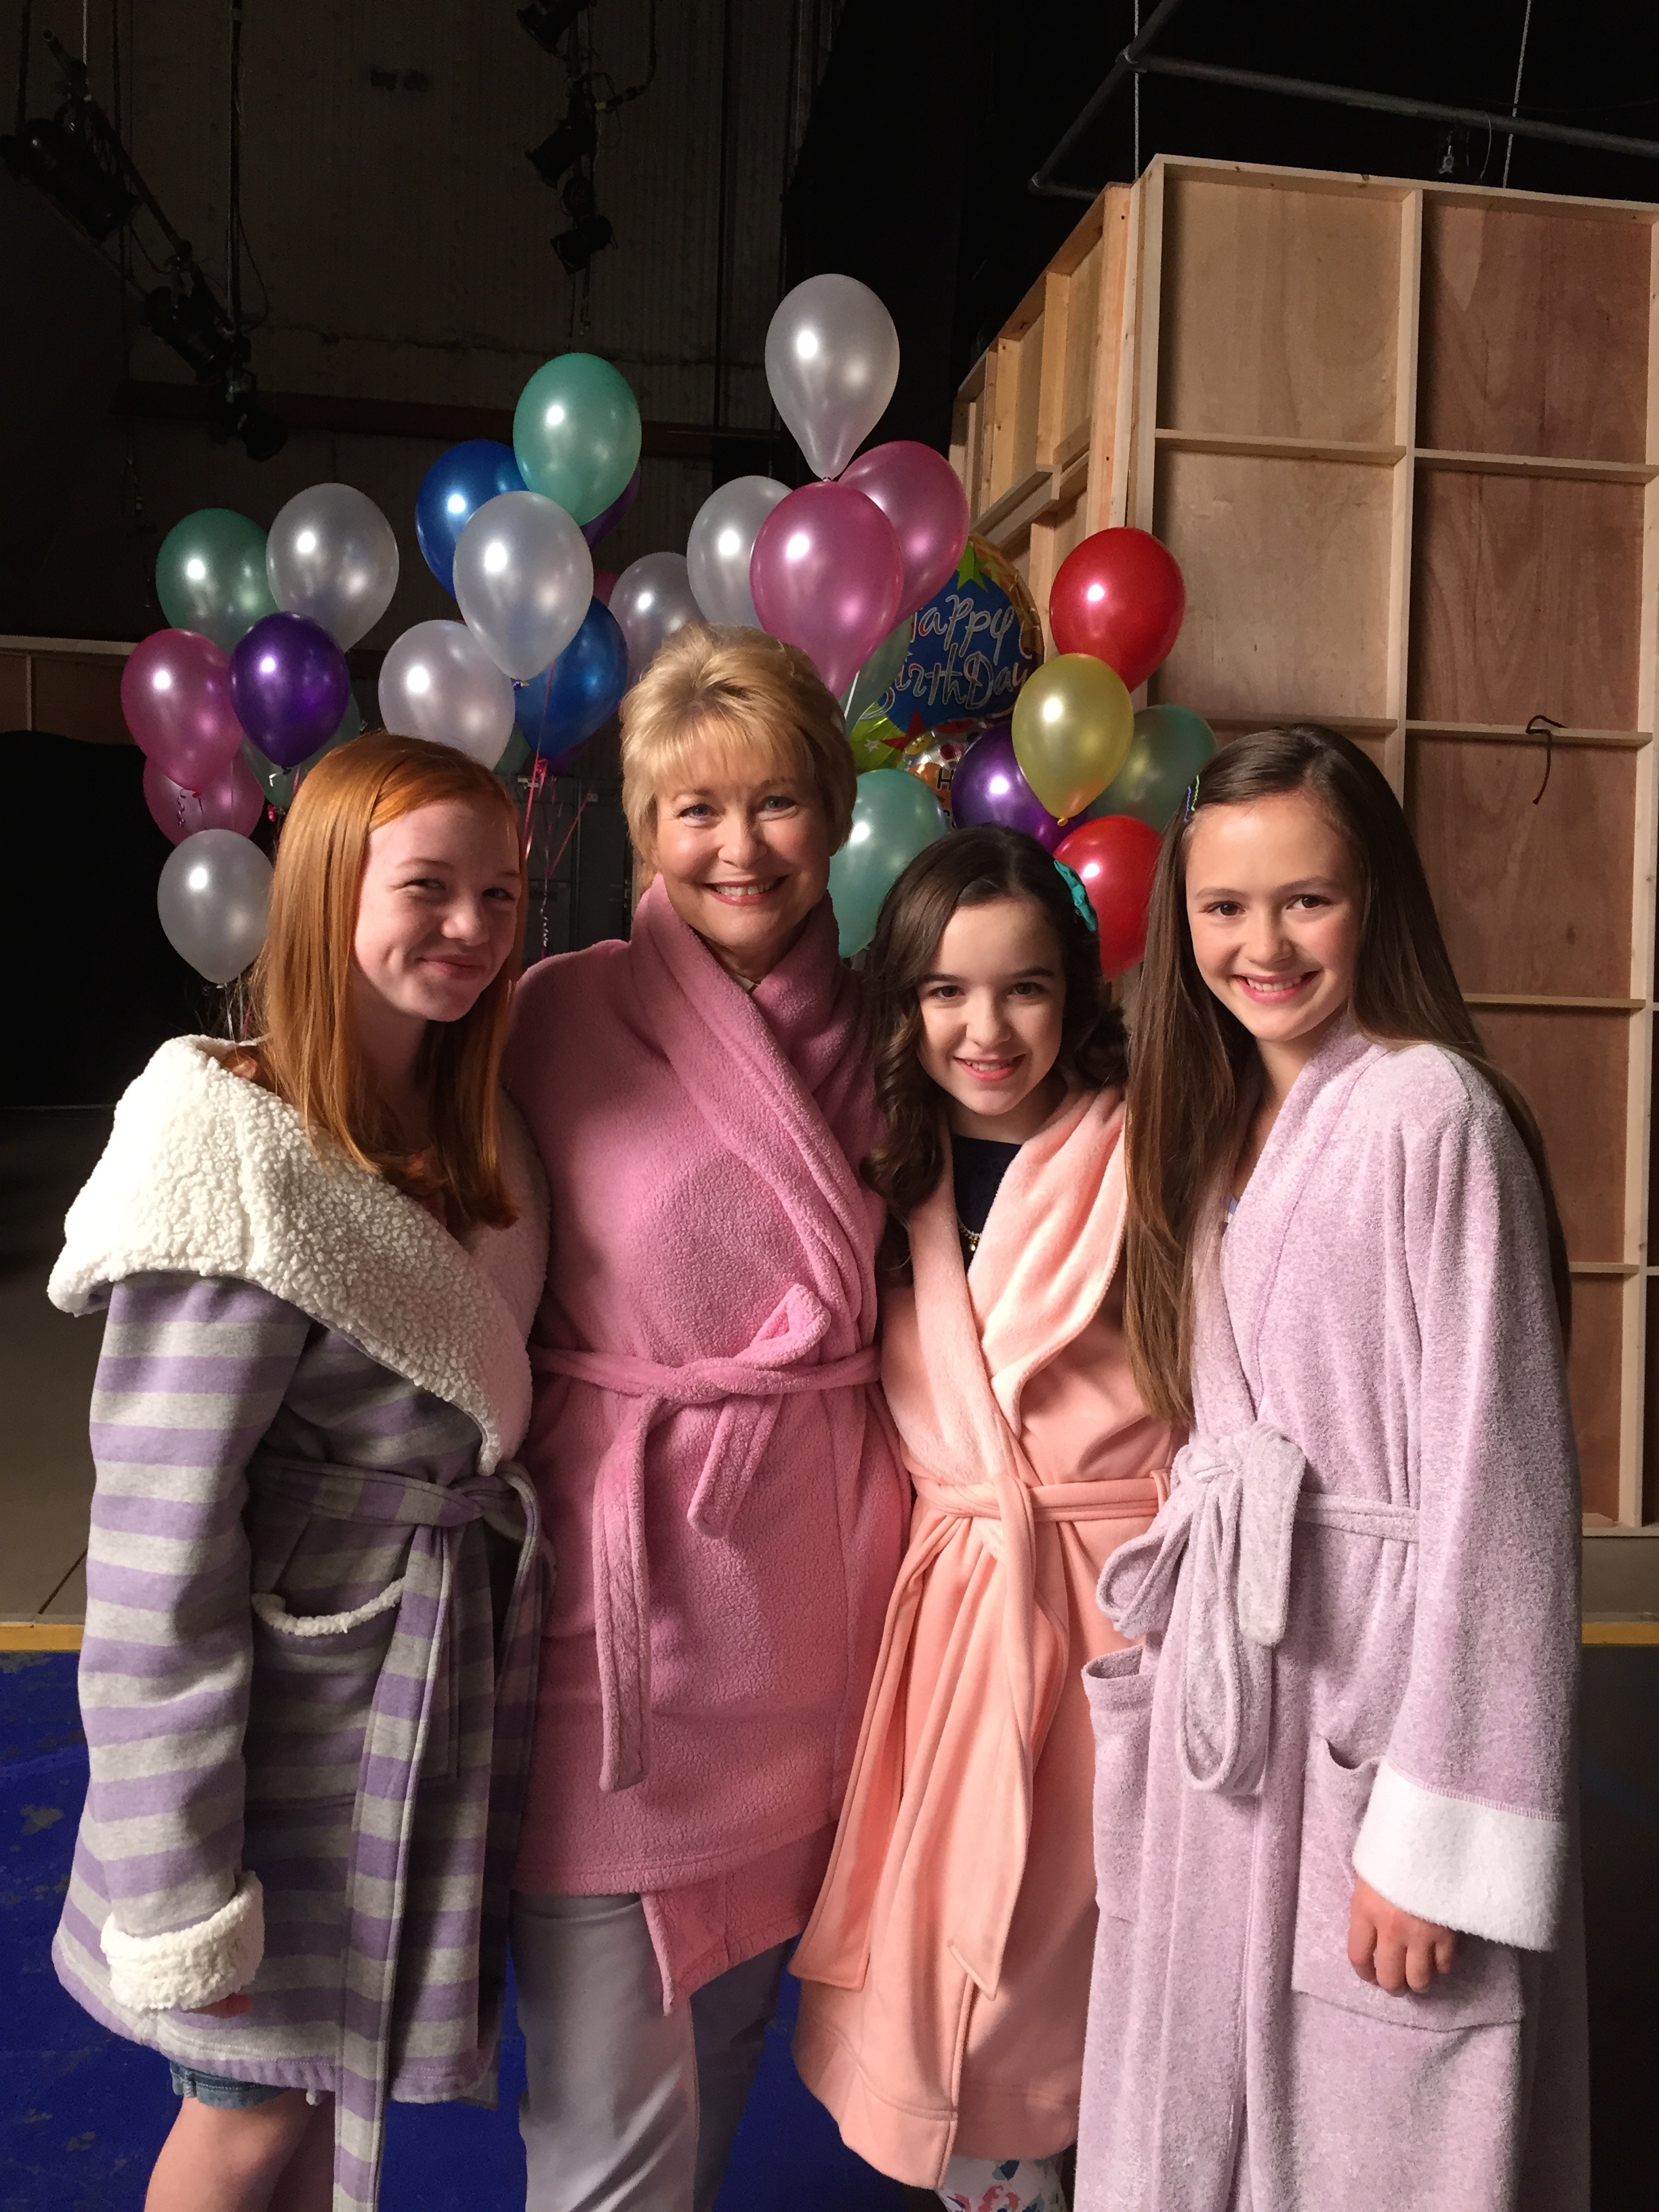 Just Add Magic set -2015 Abby Donnelly, Dee Wallace, Aubrey Miller, Olivia Sanabia